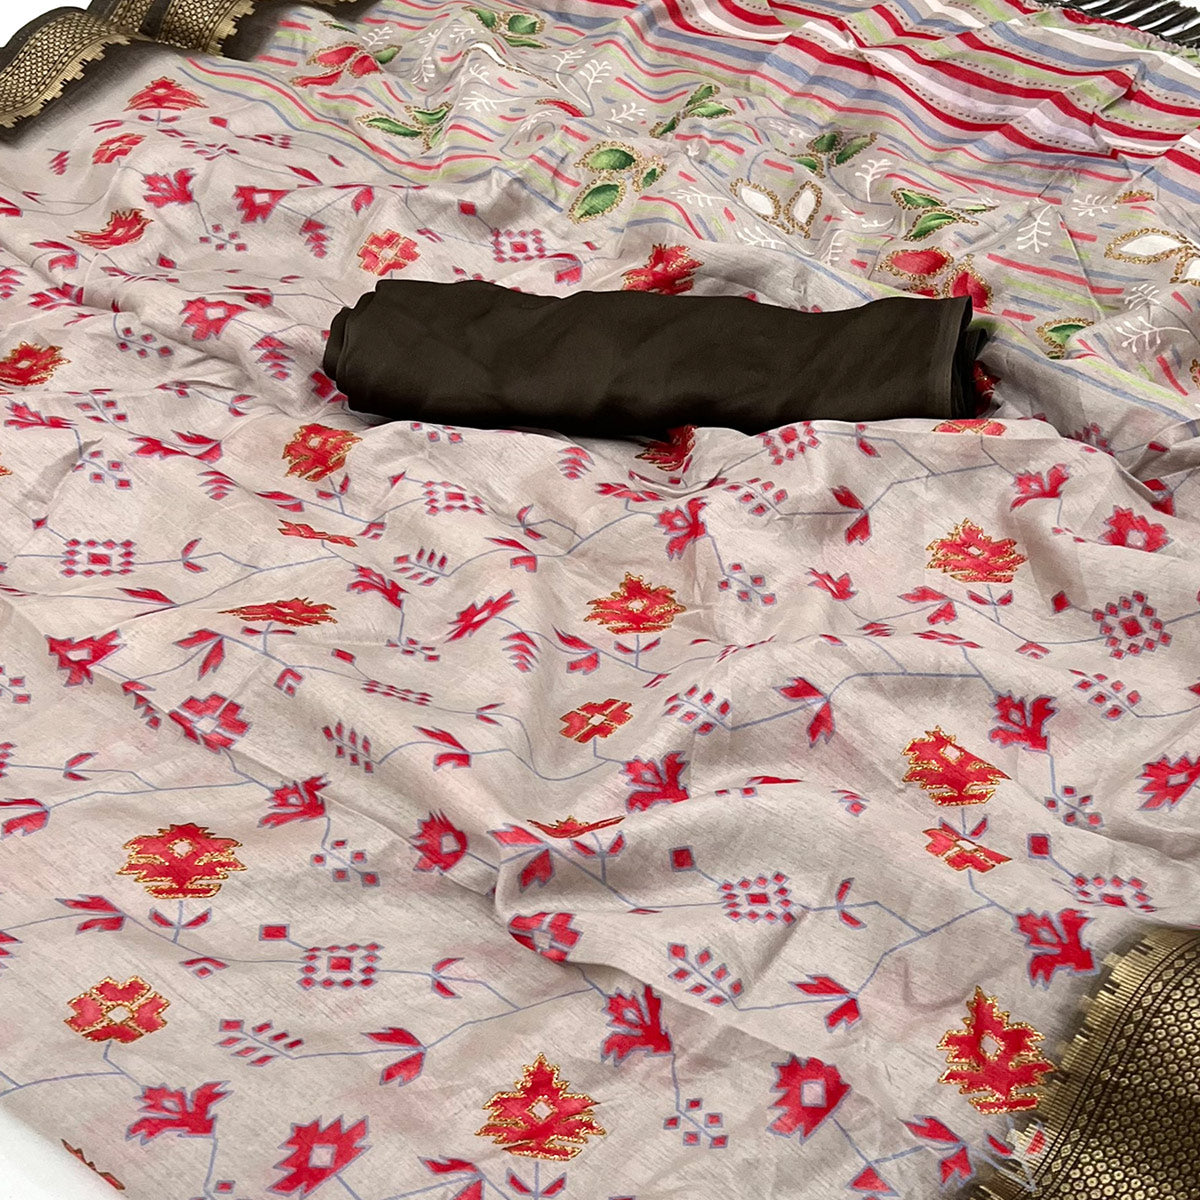 Beige Floral Printed With Woven Border Dola Silk Saree